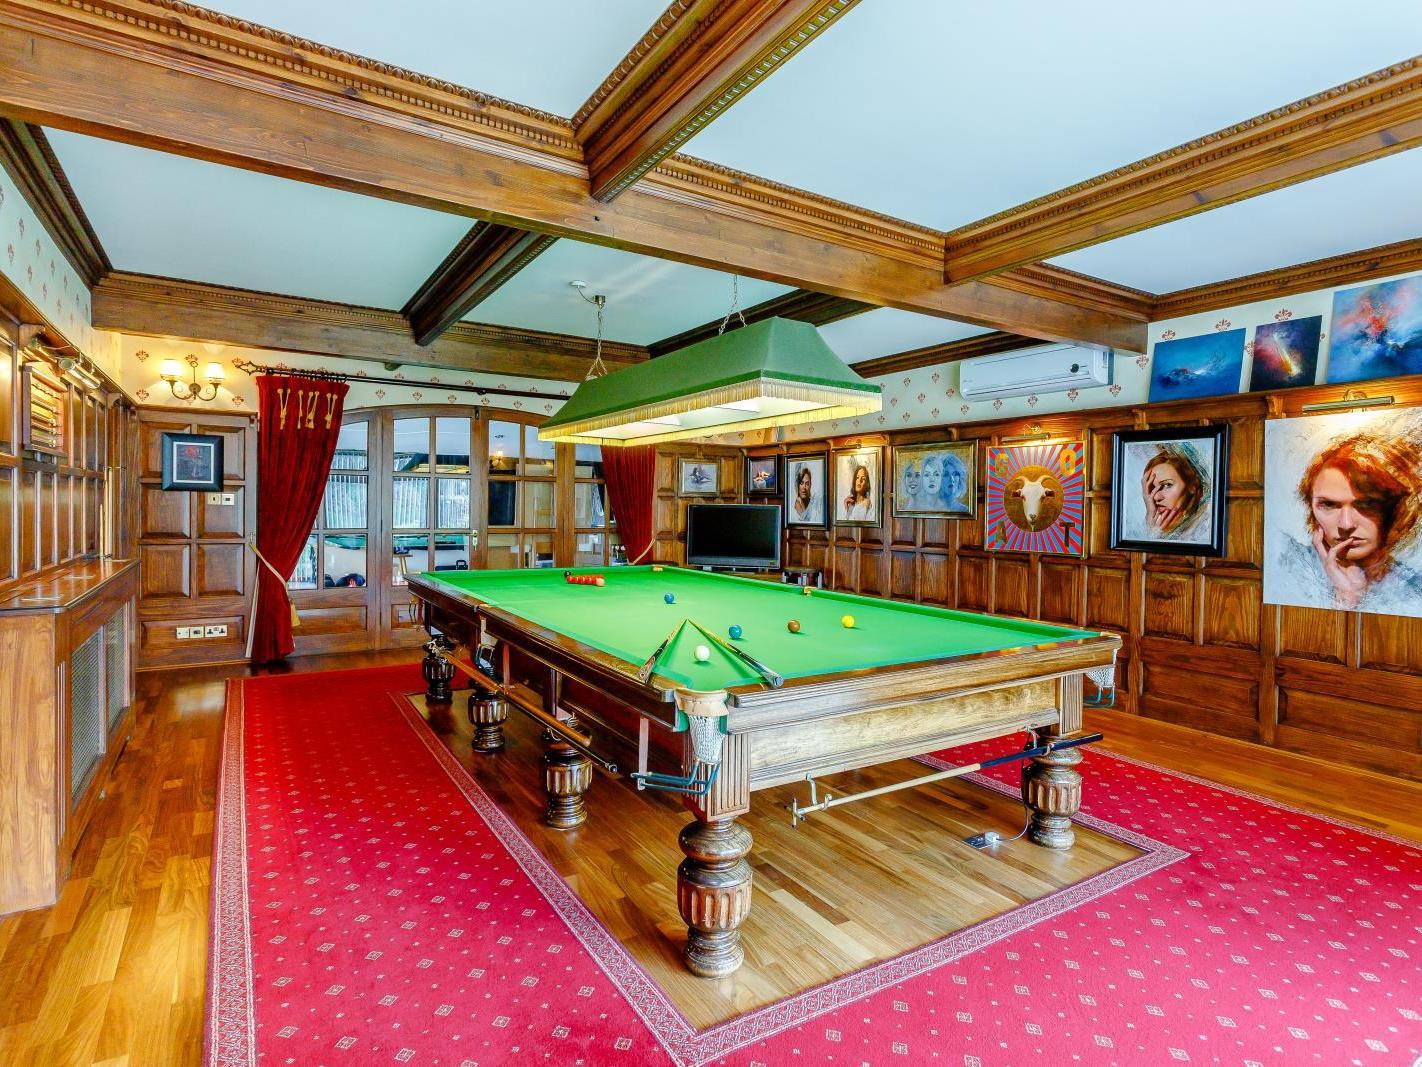 The snooker room. Photo: Fine and Country.